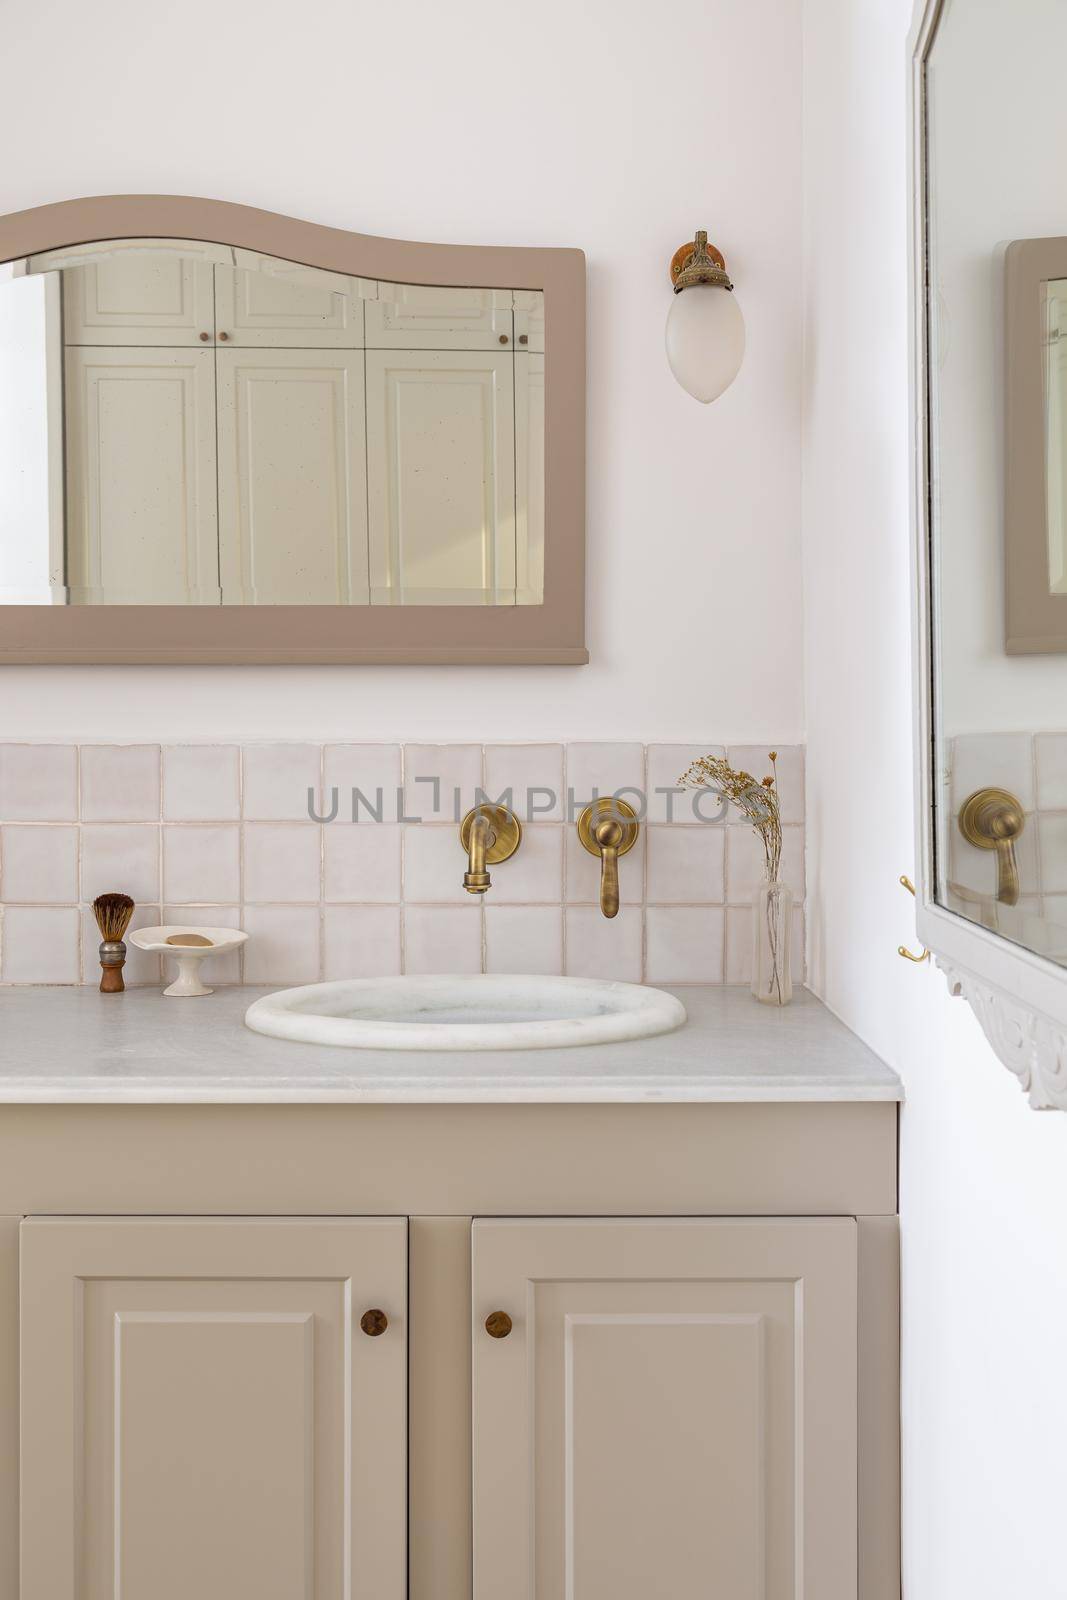 Bathroom decorated in beige color with sinks, golden faucets and vintage mirror. Interior of restroom in retro or classic style